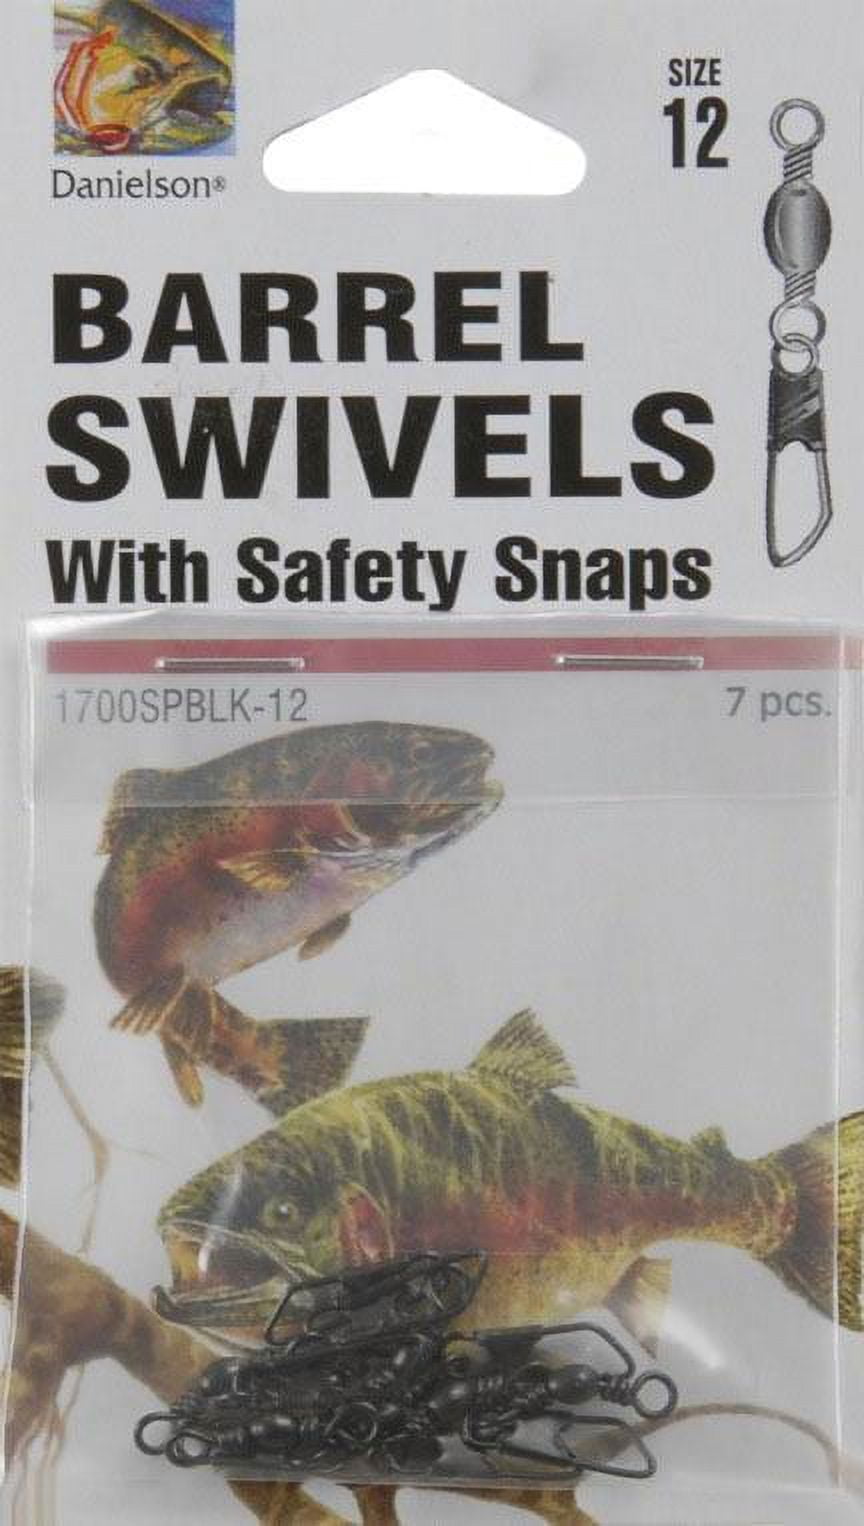 Danielson Barrel Swivels with Safety Snap Fishing Terminal Tackle, Black,  Size 12, 7-pack 